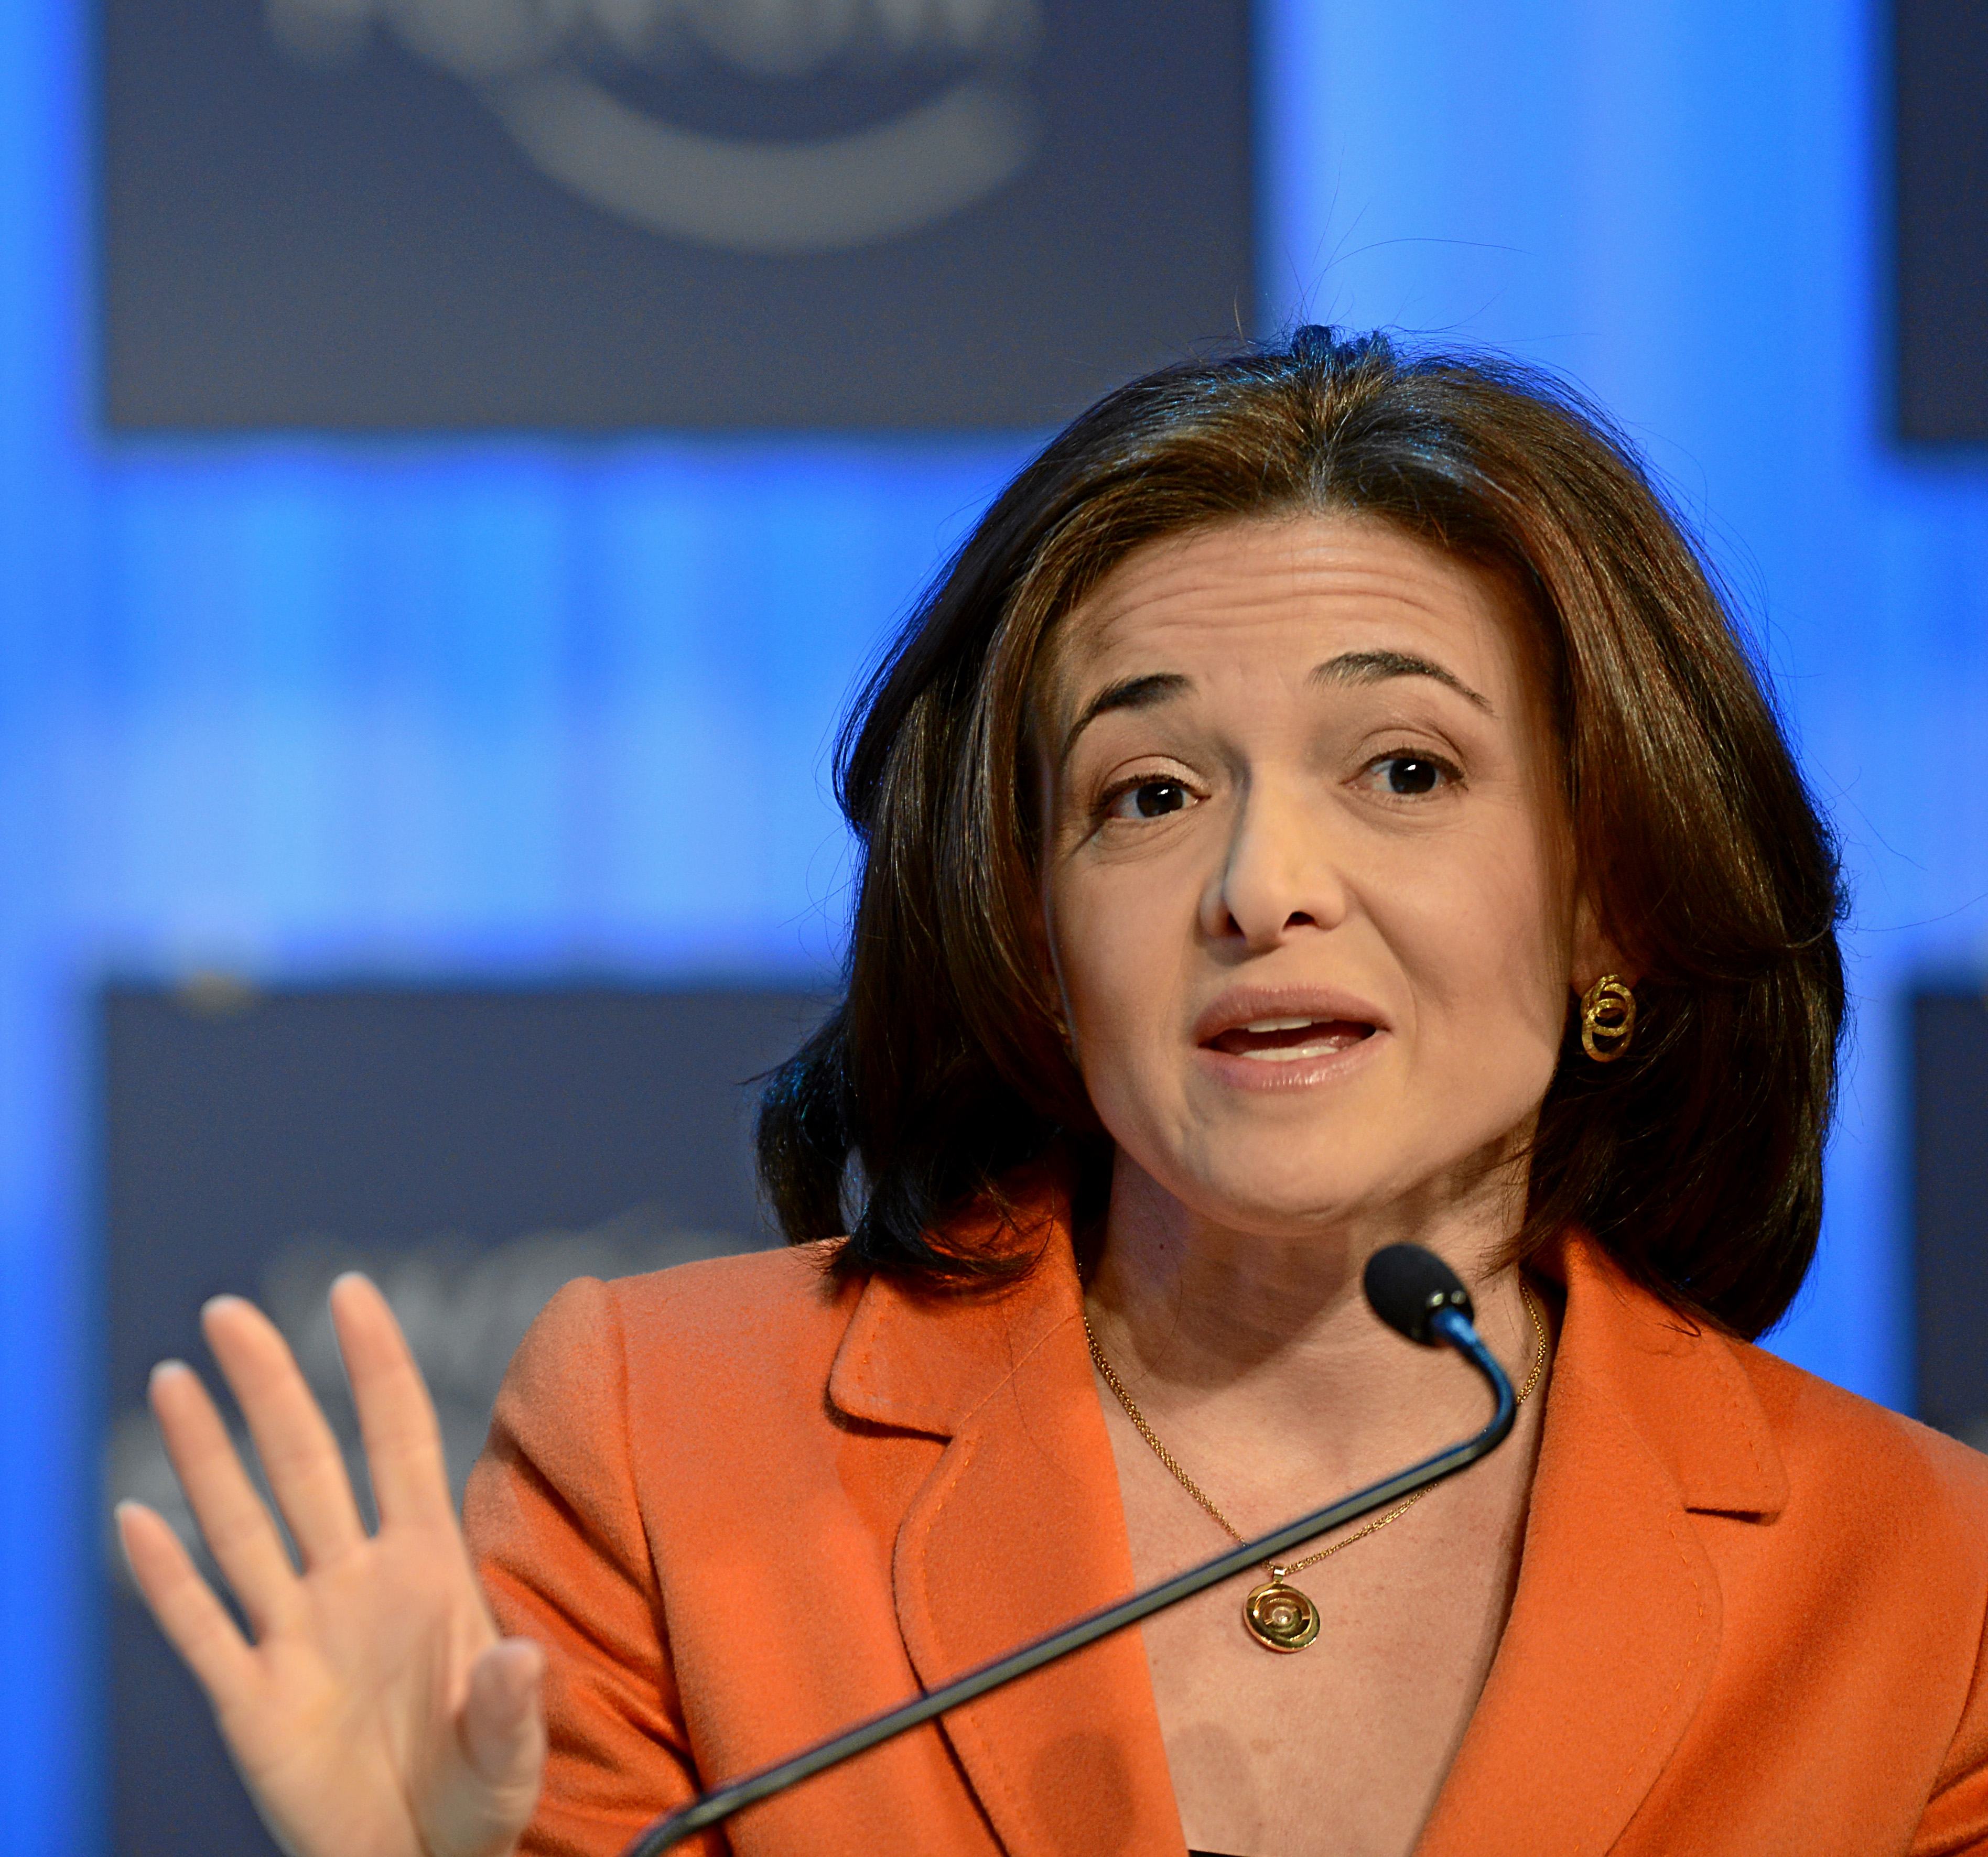 7 Books Sheryl Sandberg Recommend You To Read (Only If You Want To Succeed At Work)